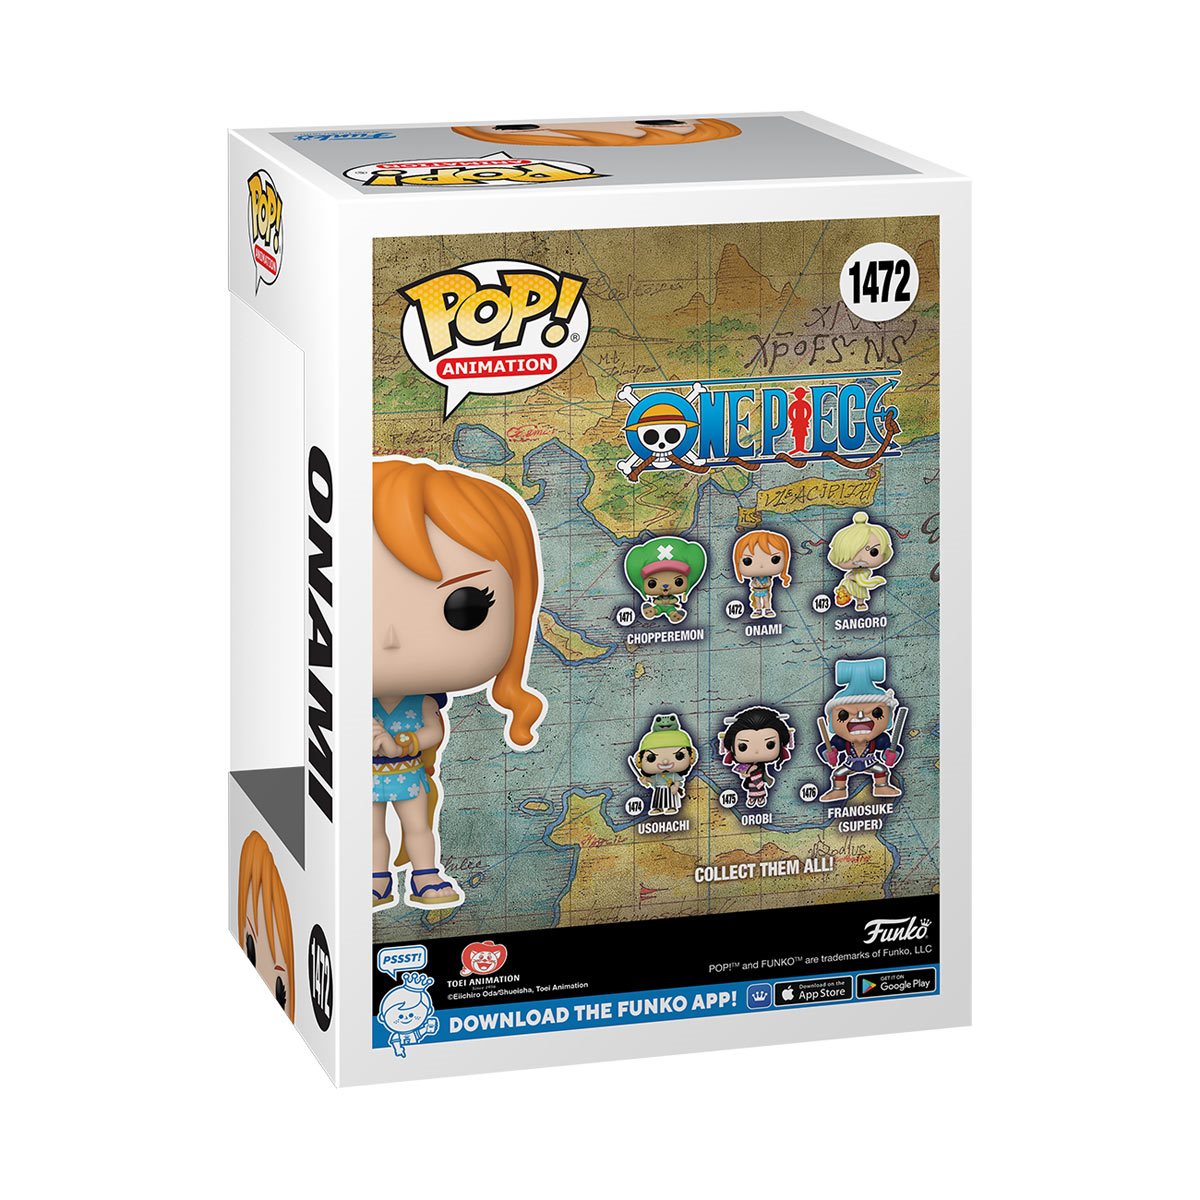 All the Funko POP One Piece figures